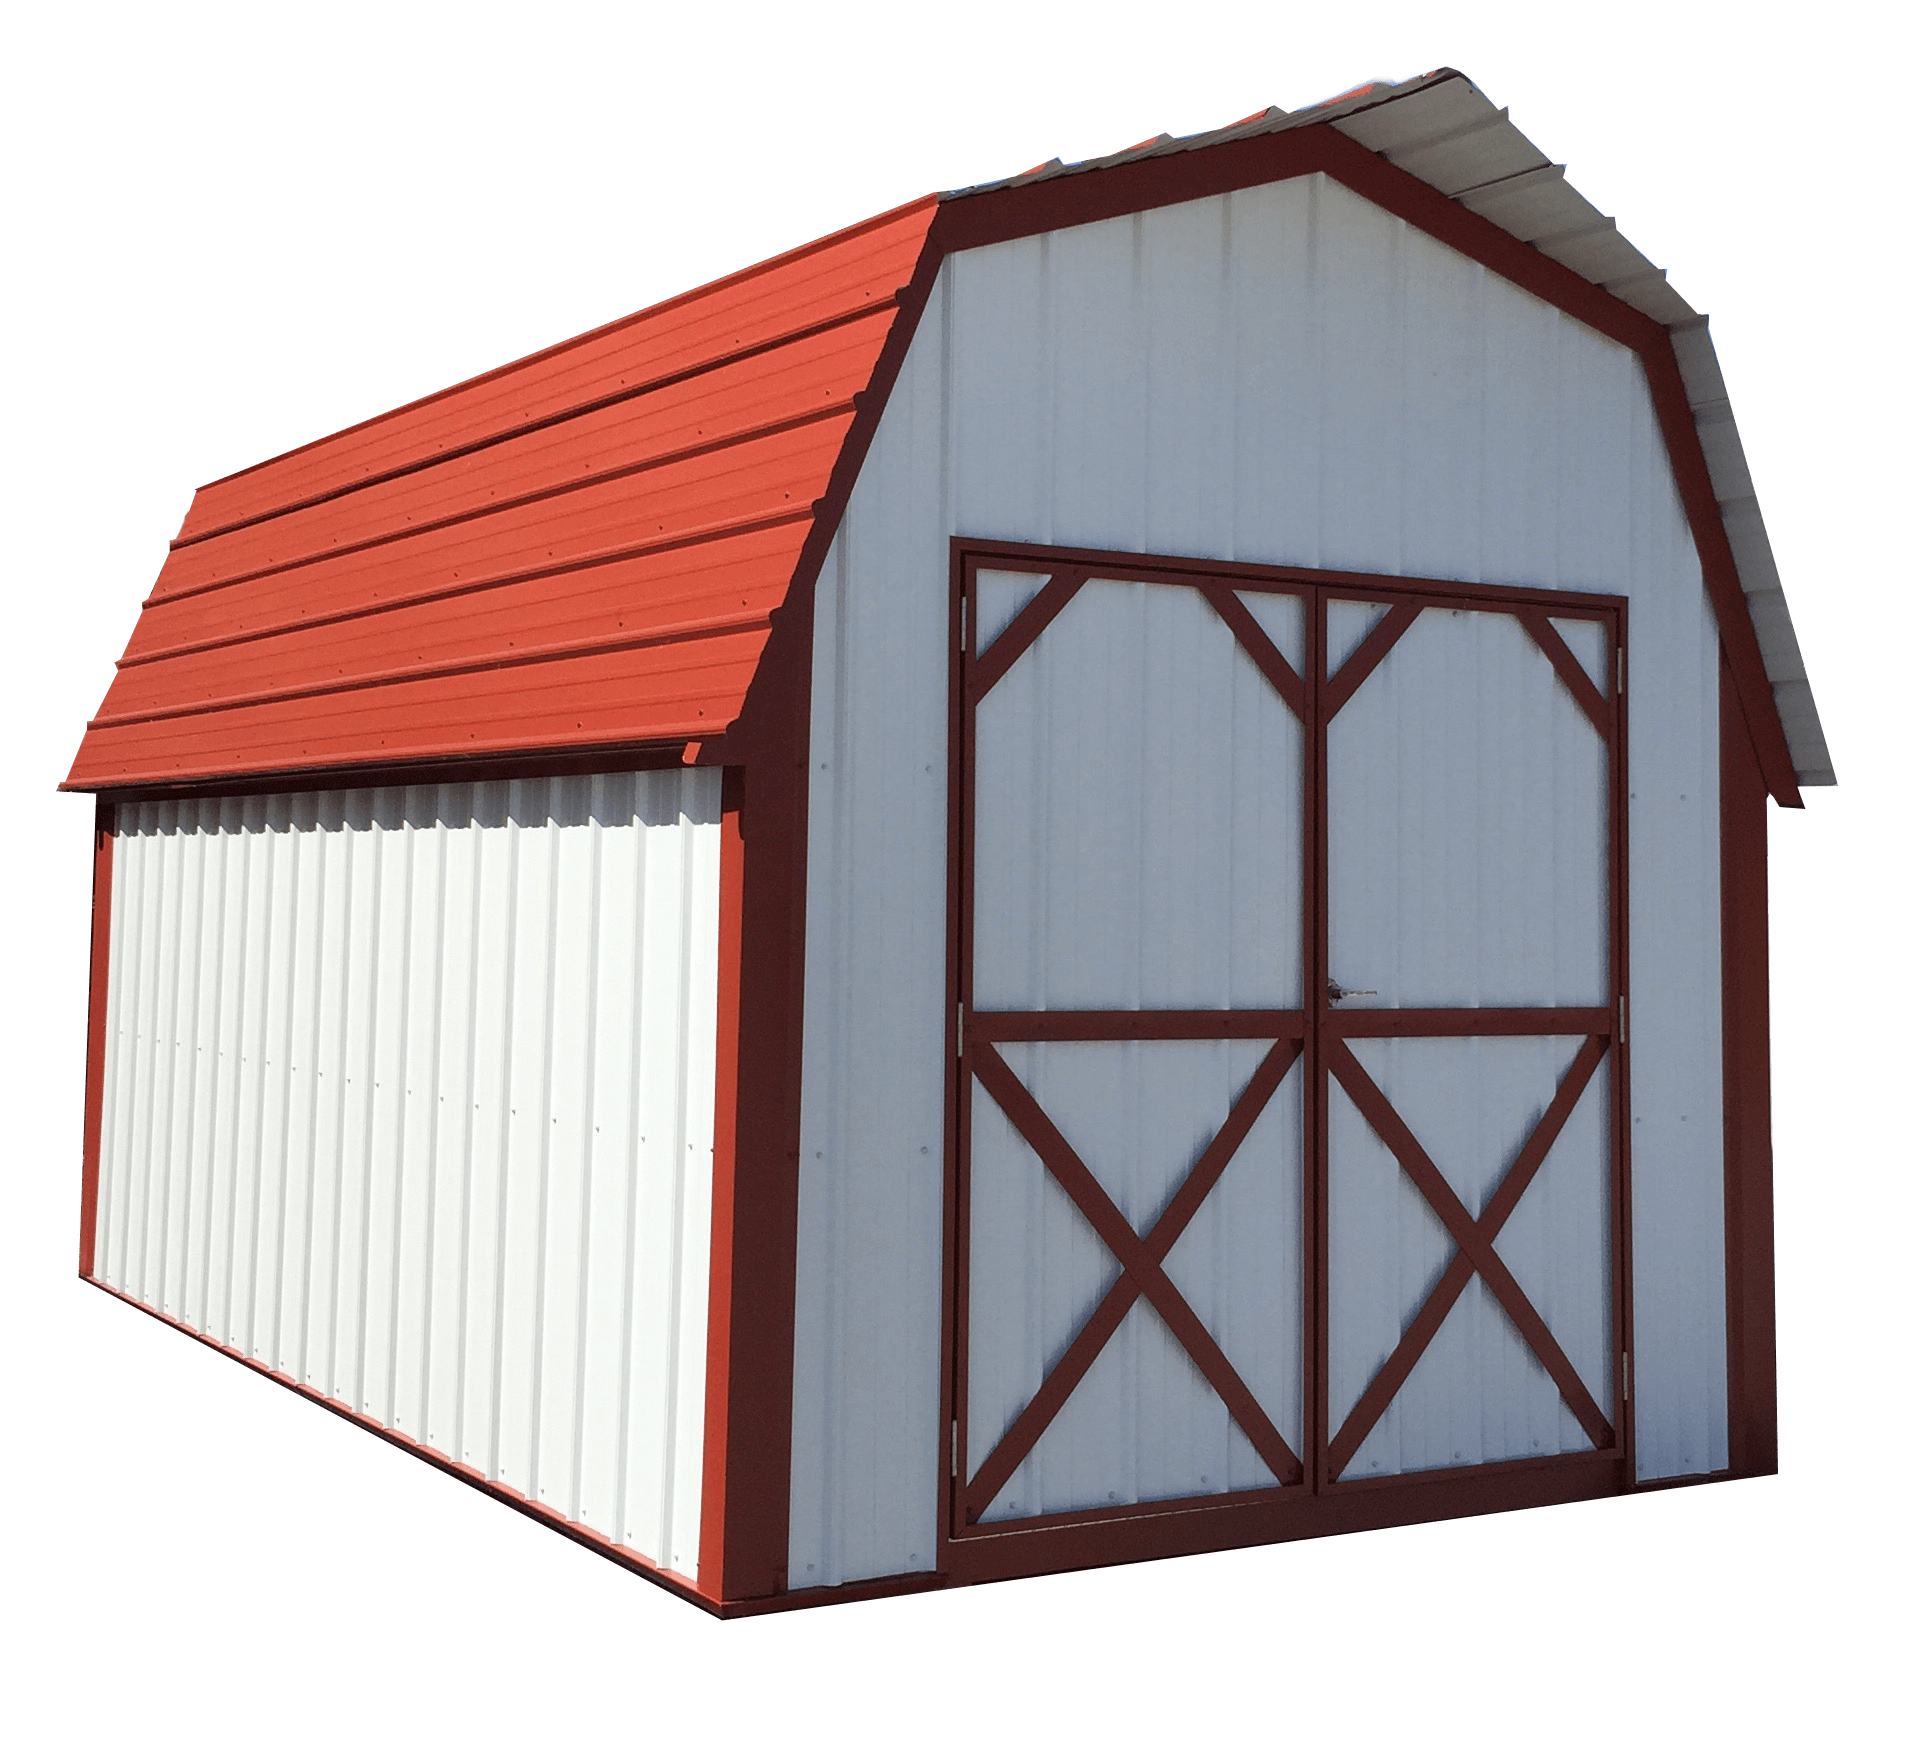 Clear white metal lofted barn with red trim and roof